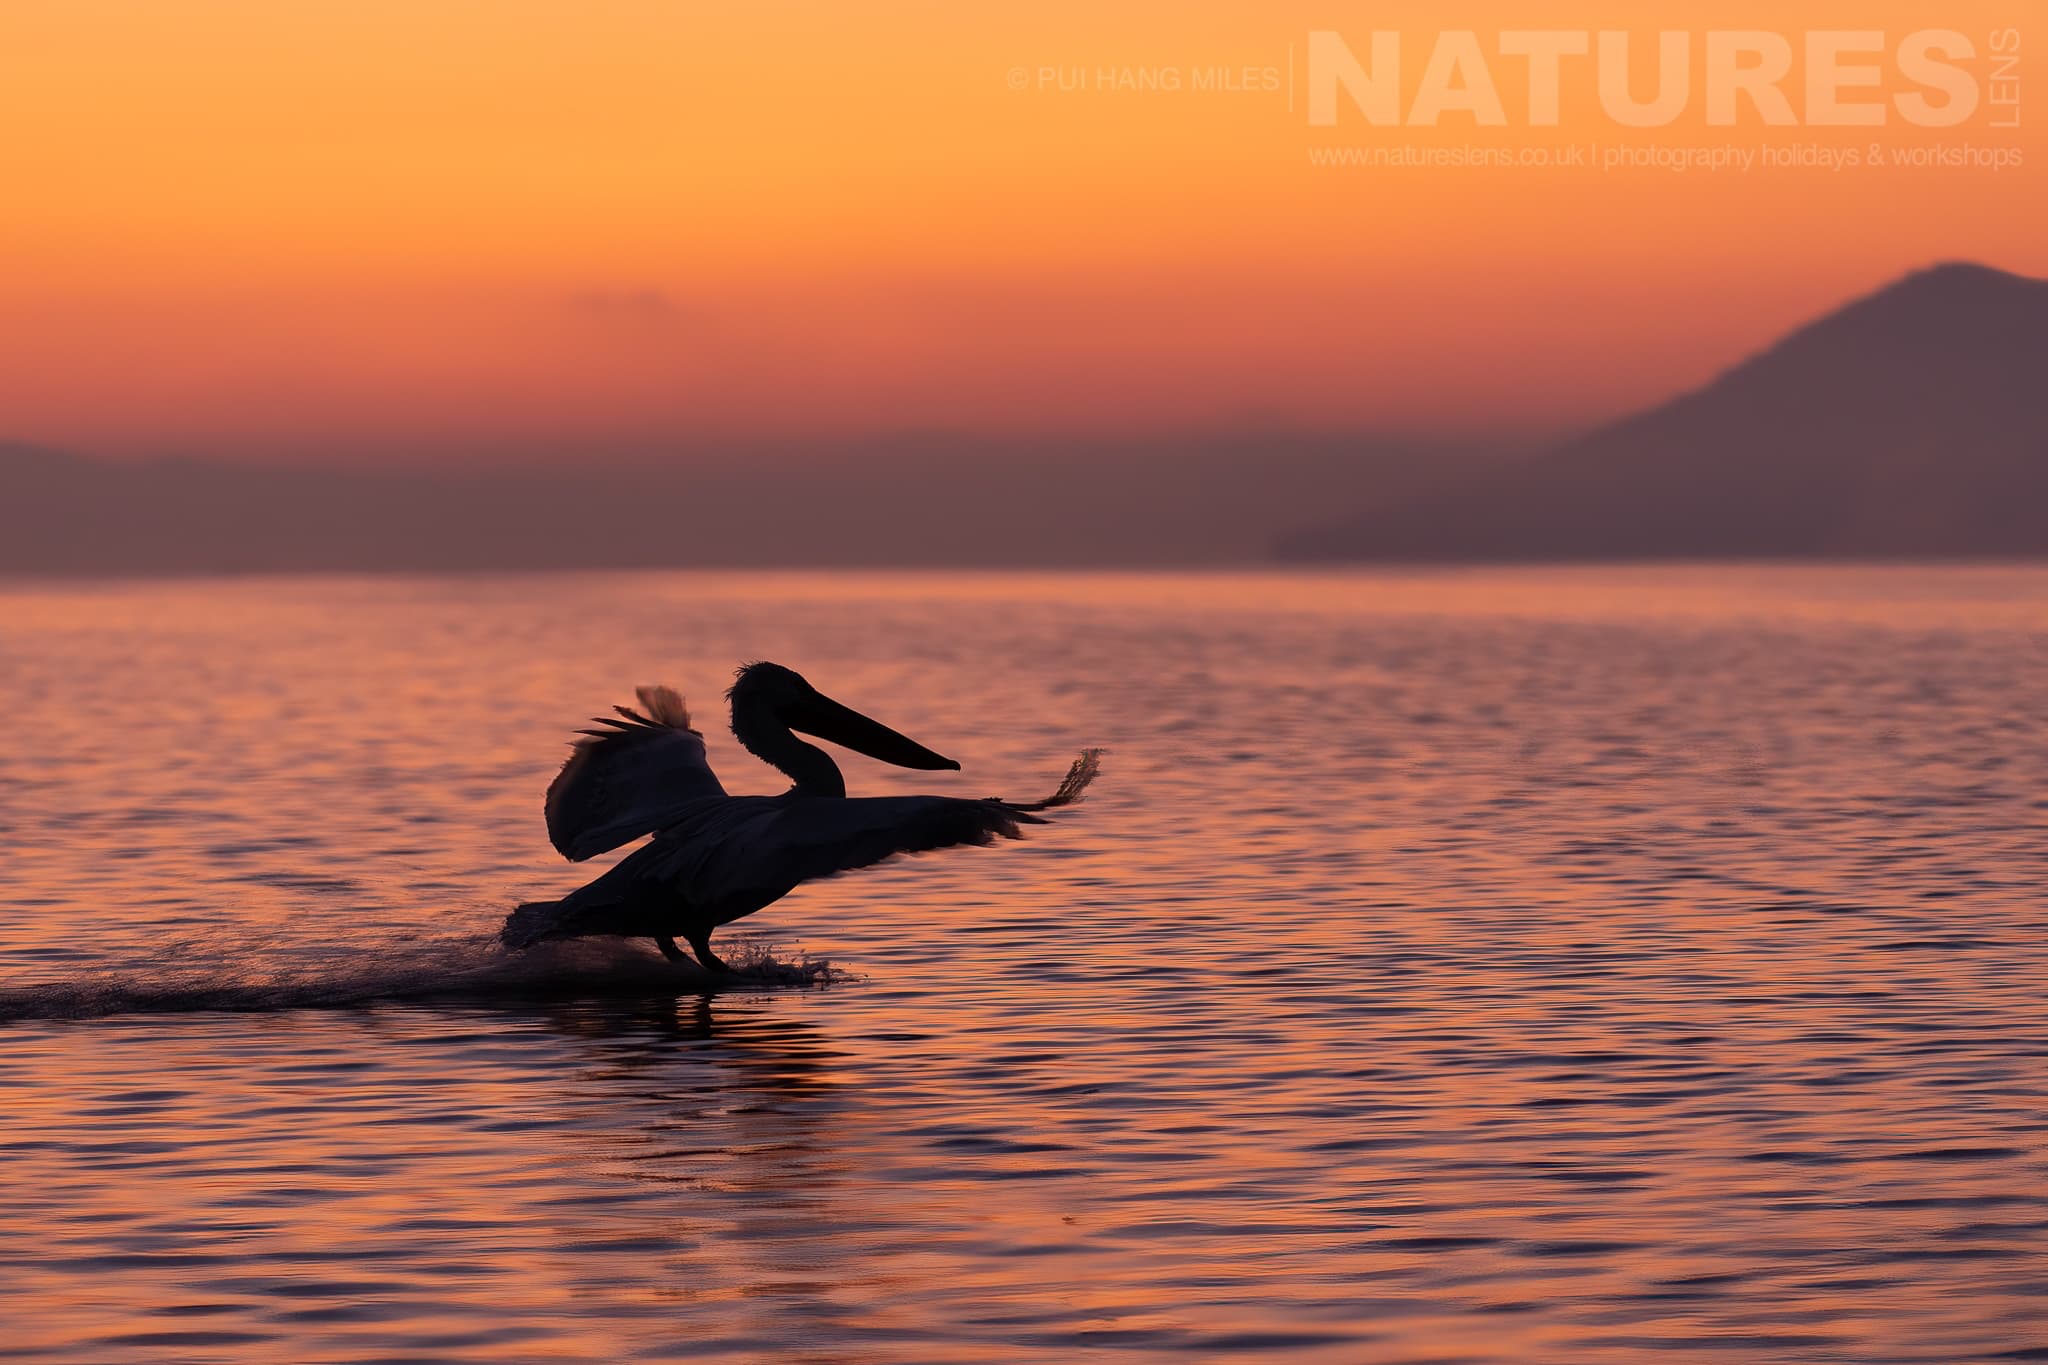 One Of The Pelicans Of Lake Kerkini Lands On The Waters Of The Lake As The Sun Rises Photographed During A Natureslens Pelicans Of Lake Kerkini Photography Holiday